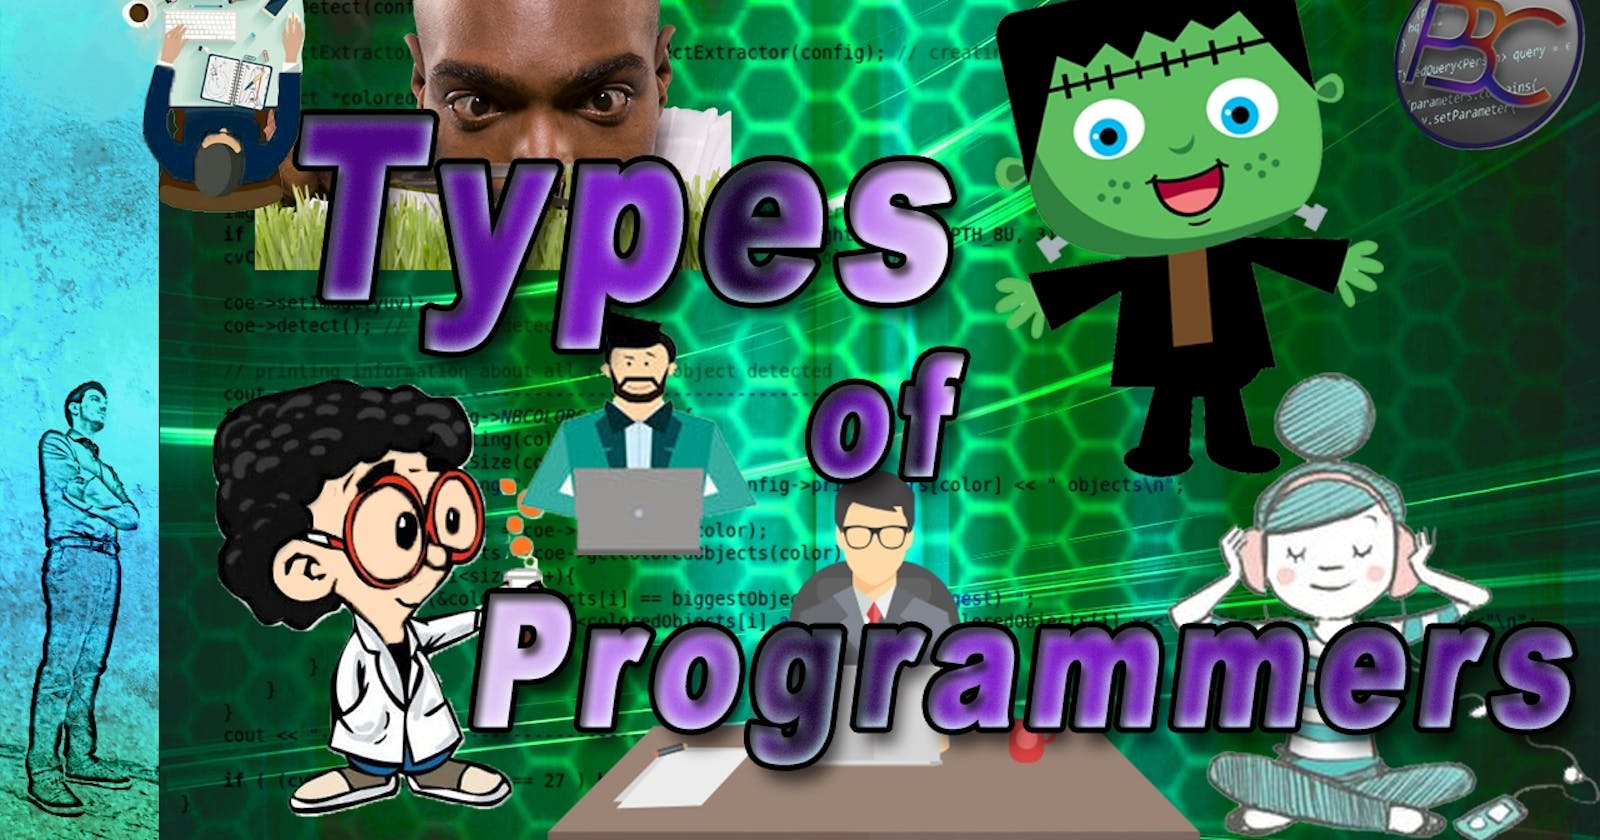 9 Types of programmers  which type of coder are you - YouTube